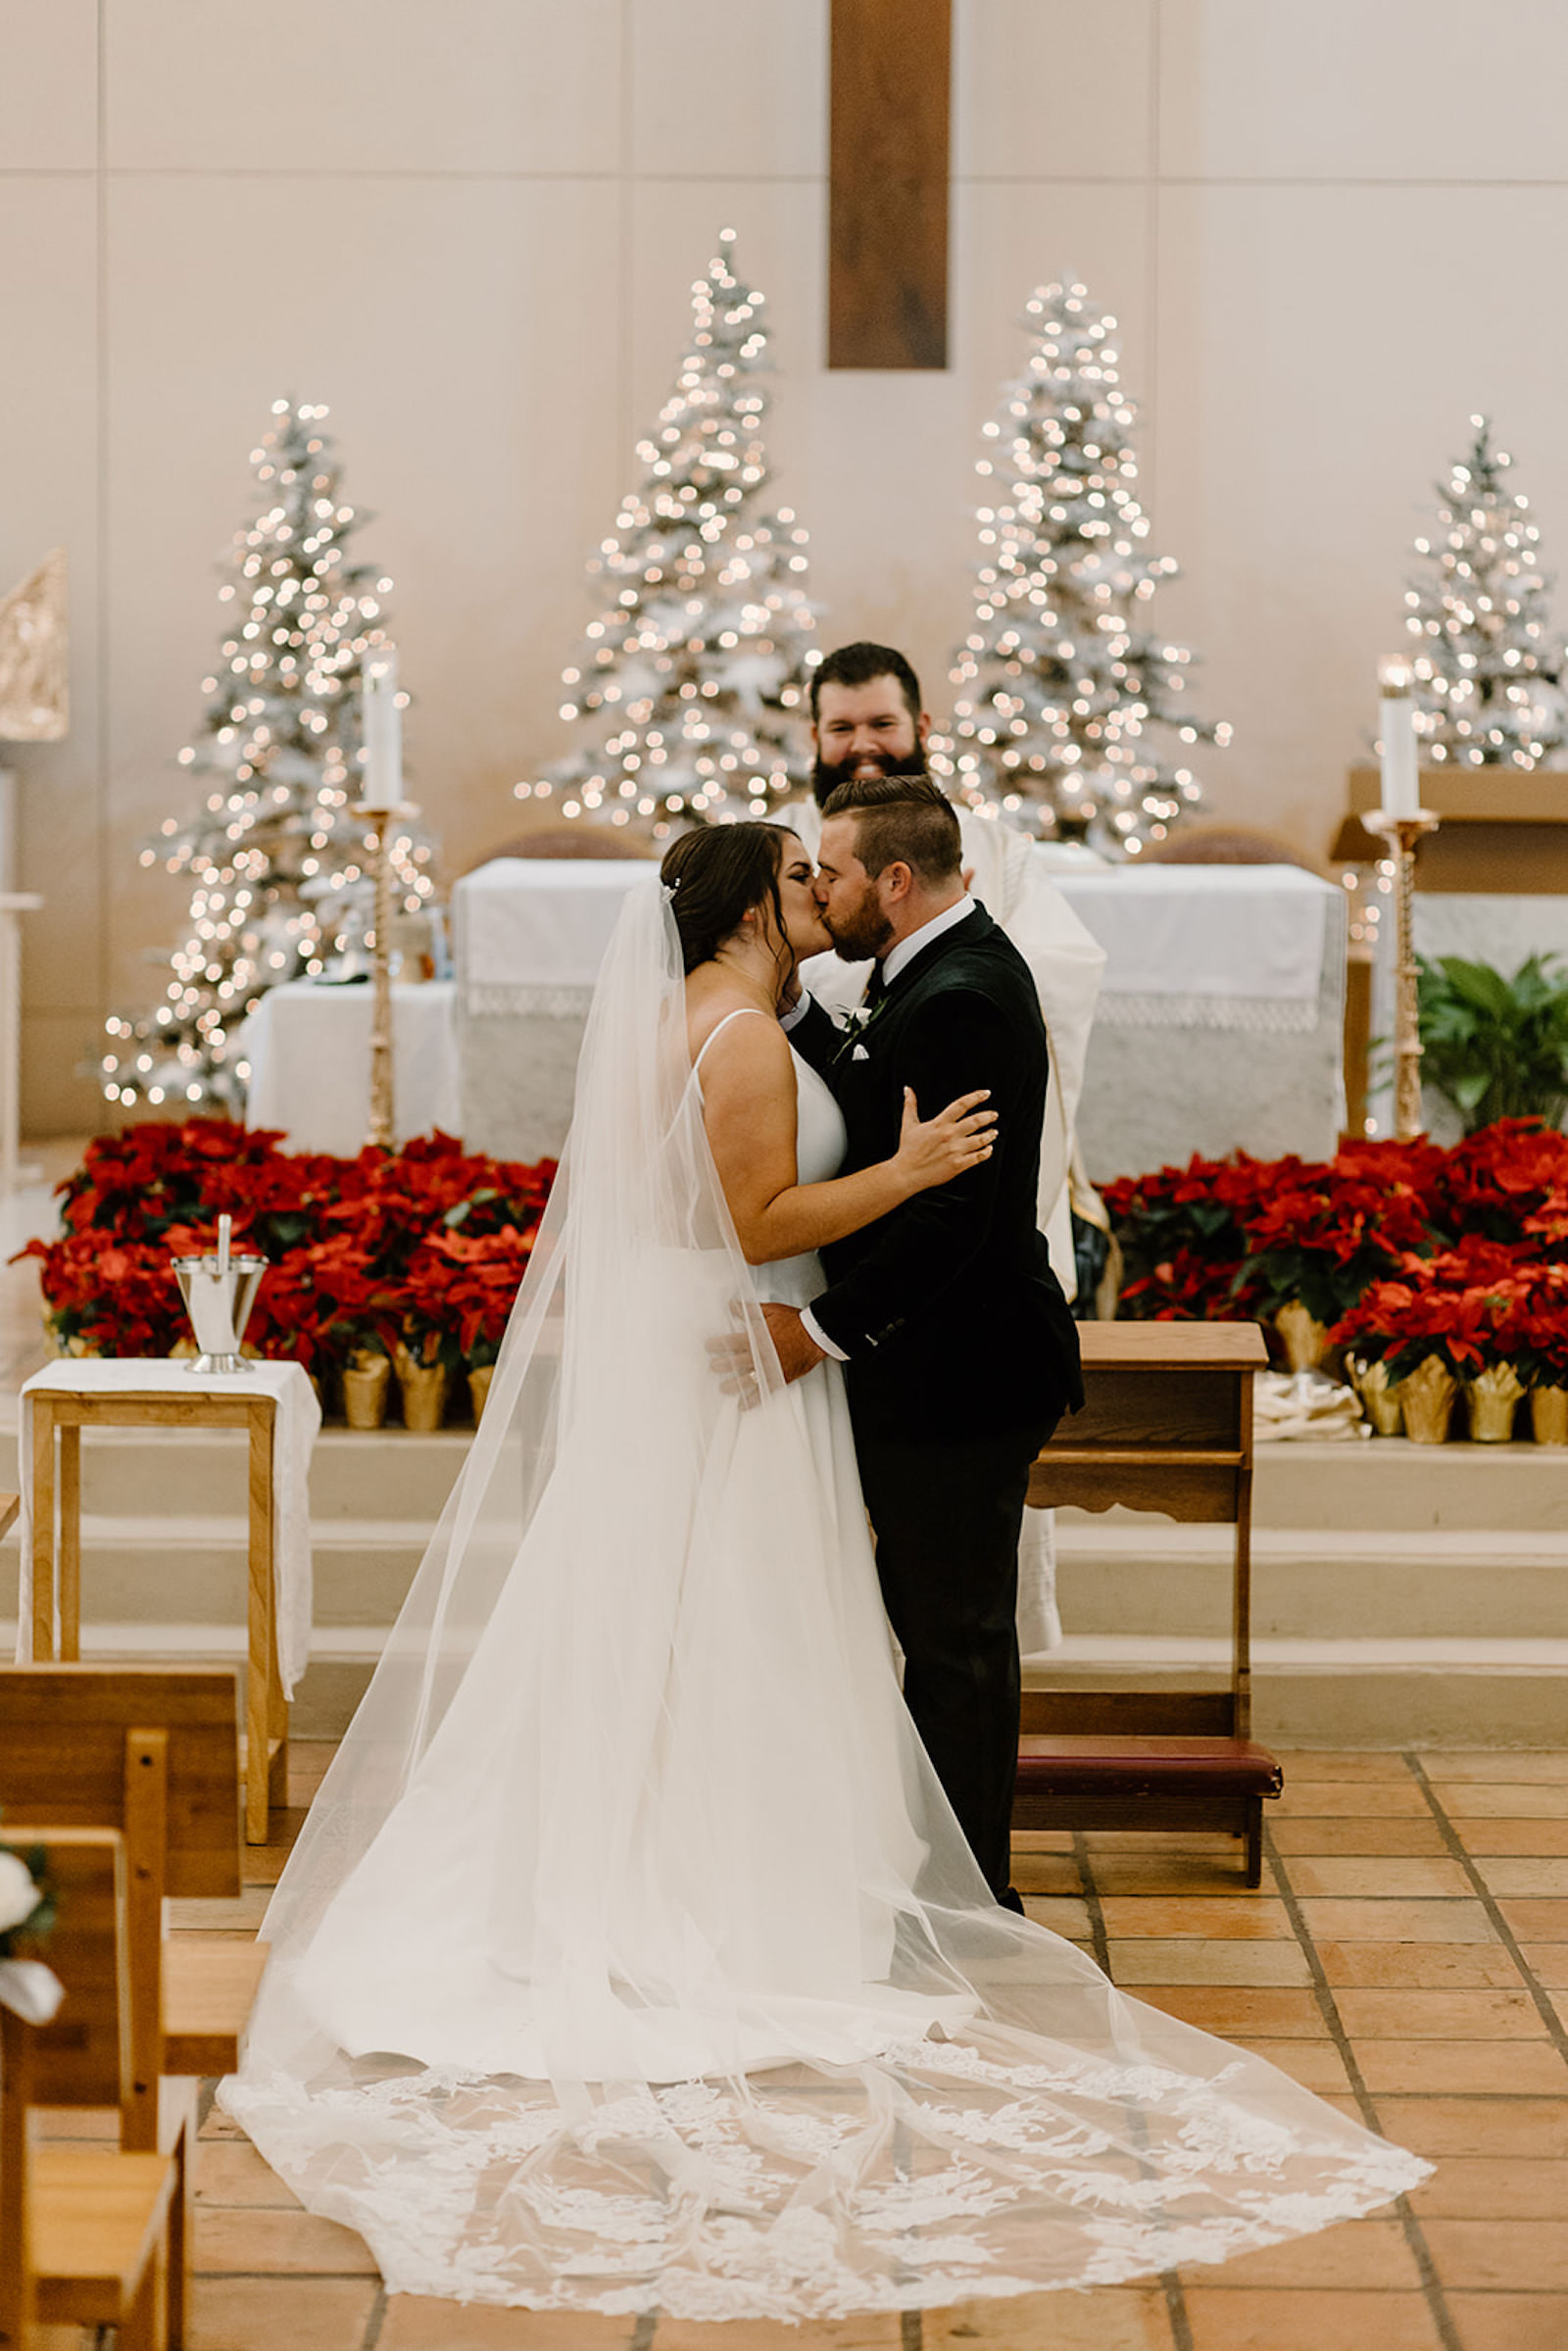 Bride and Groom at the Alter in Christmas Church Wedding Ceremony with Red Floral Accents First Kiss Portrait | Tampa Wedding Florist FH Events